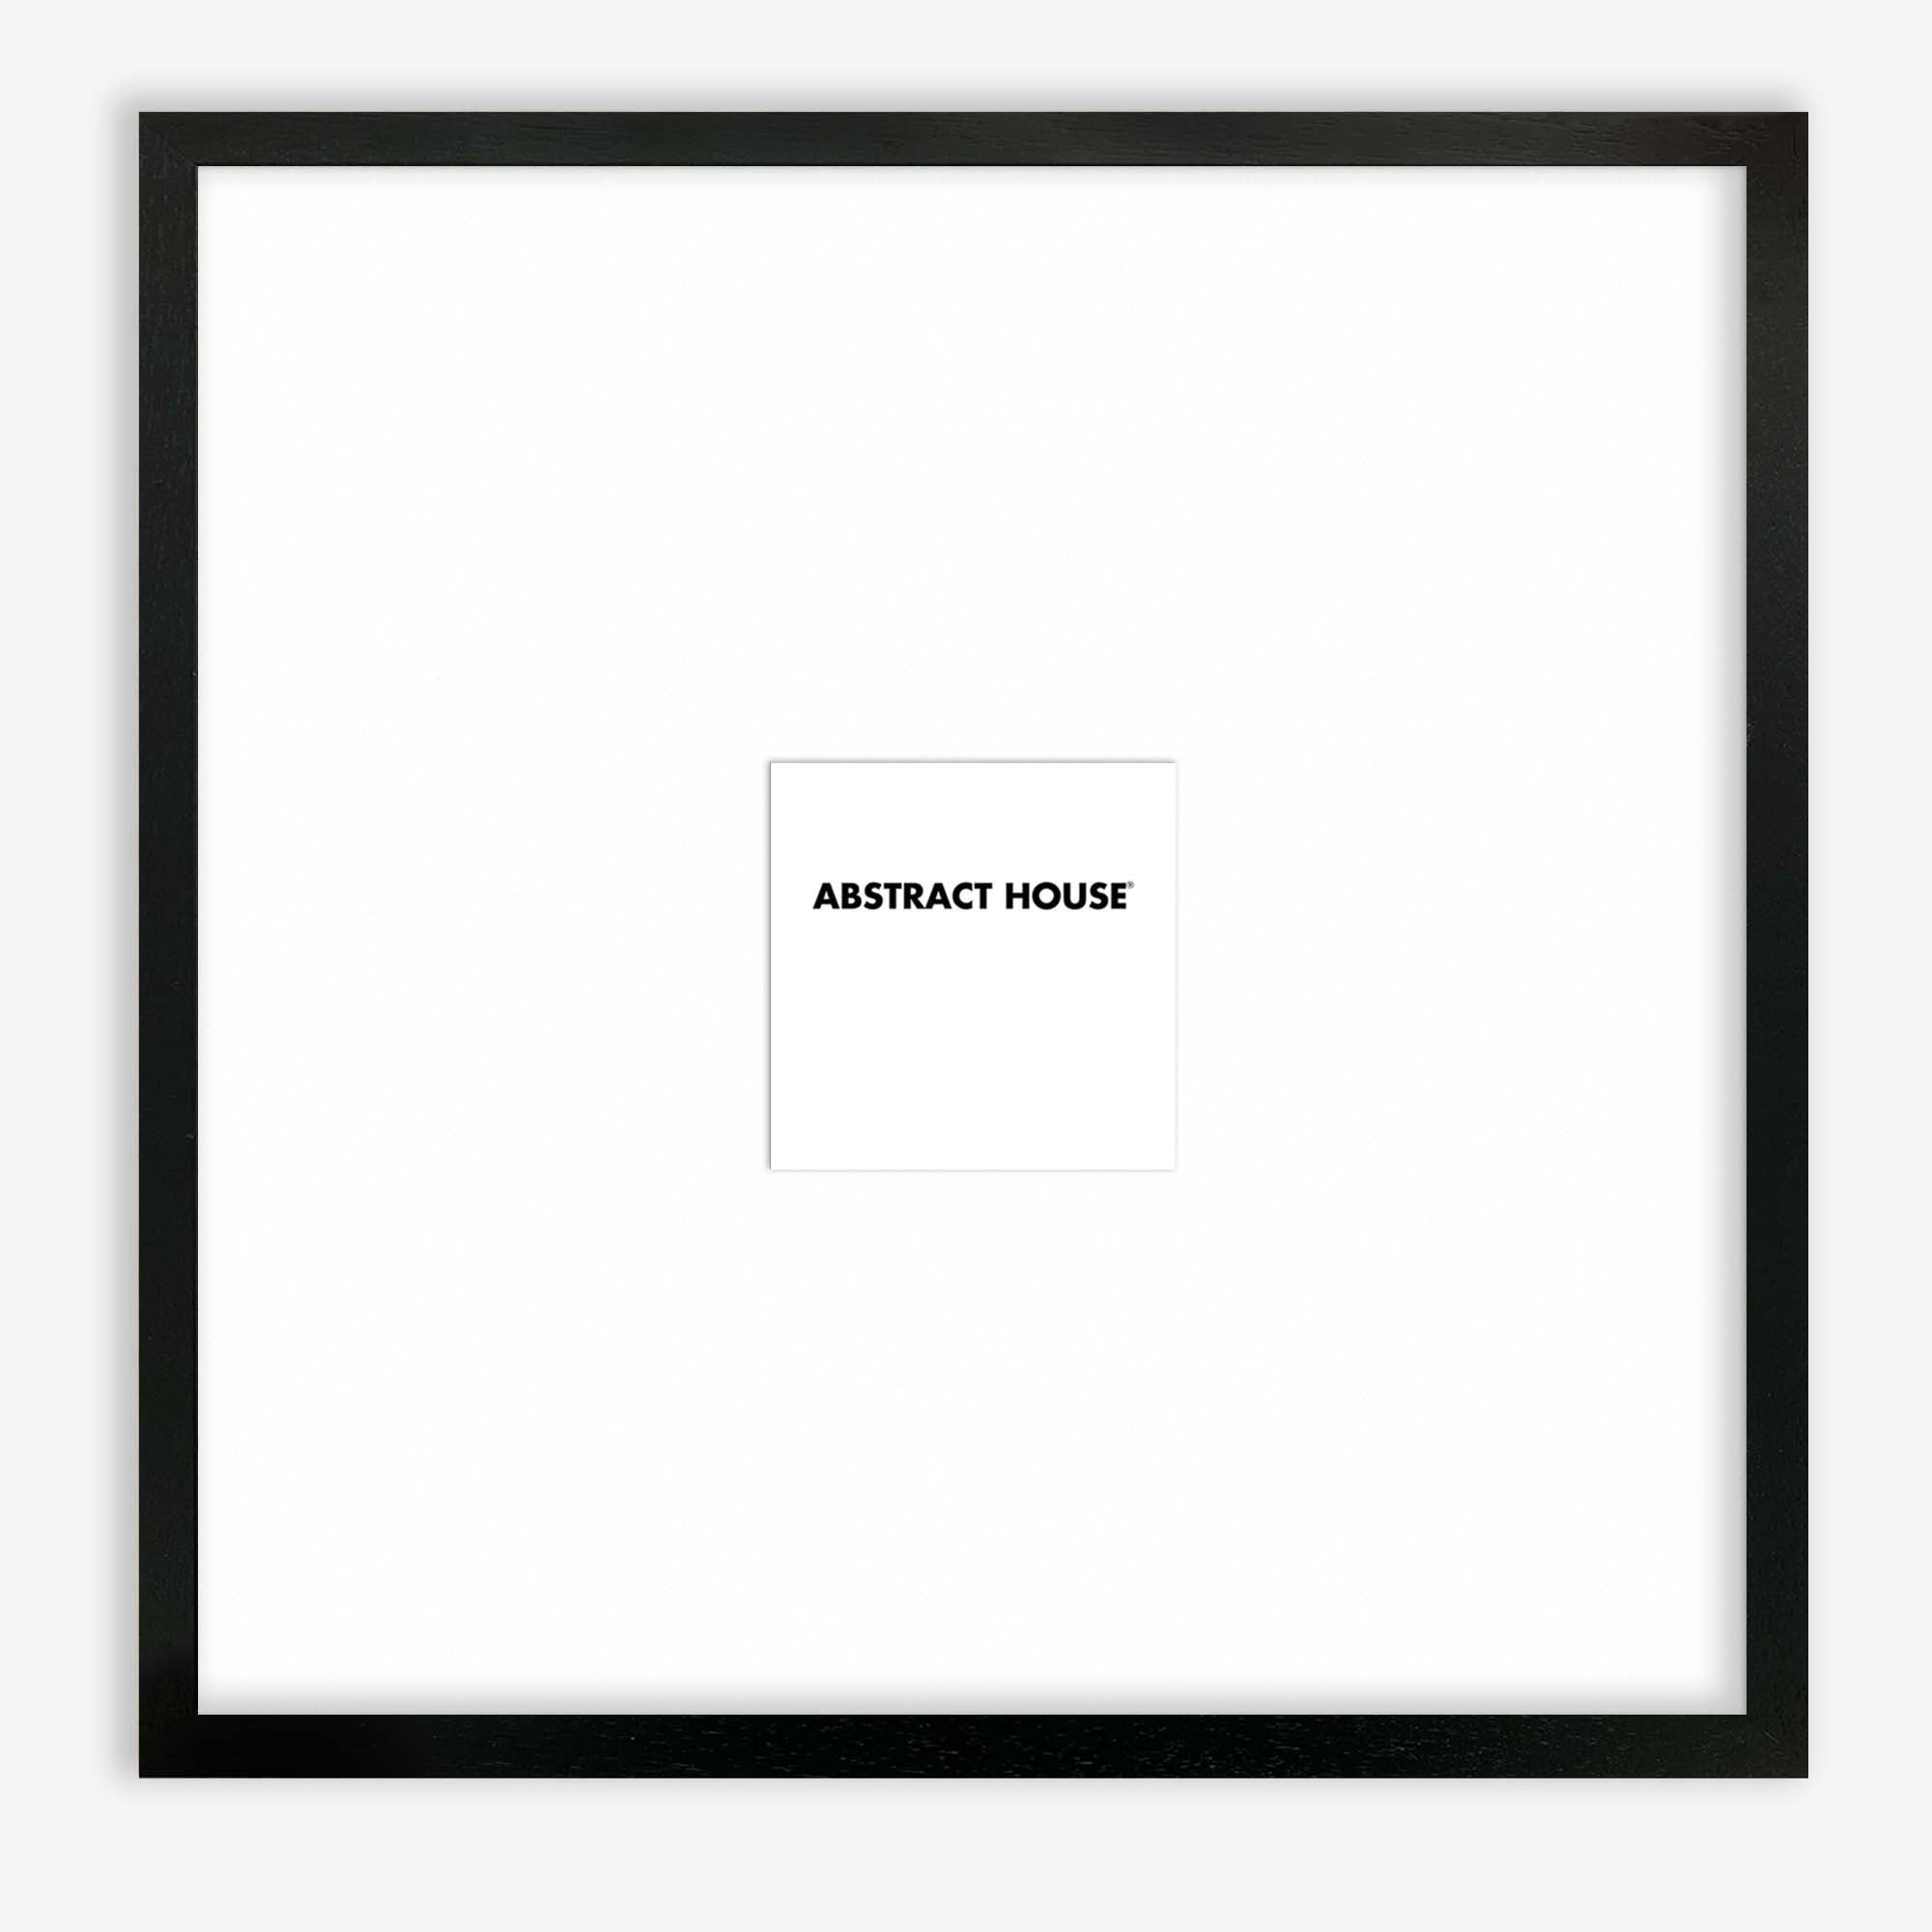 70x70 cm Wooden Frame-Black-20 x 20 cm / 7.9 x 7.9 Inches-Abstract House